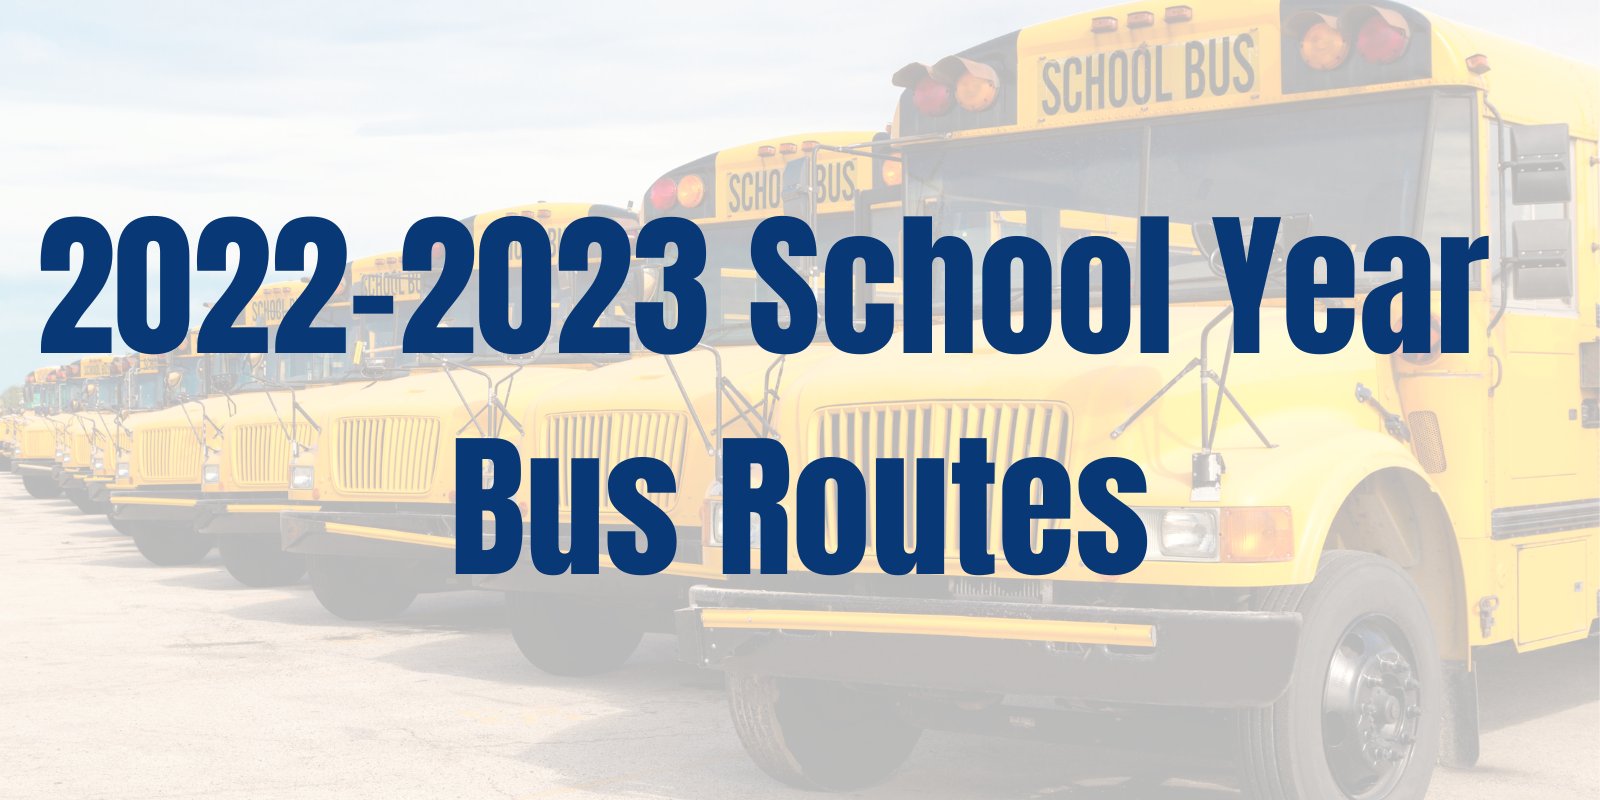 The 2022-2023 school bus routes are now available.